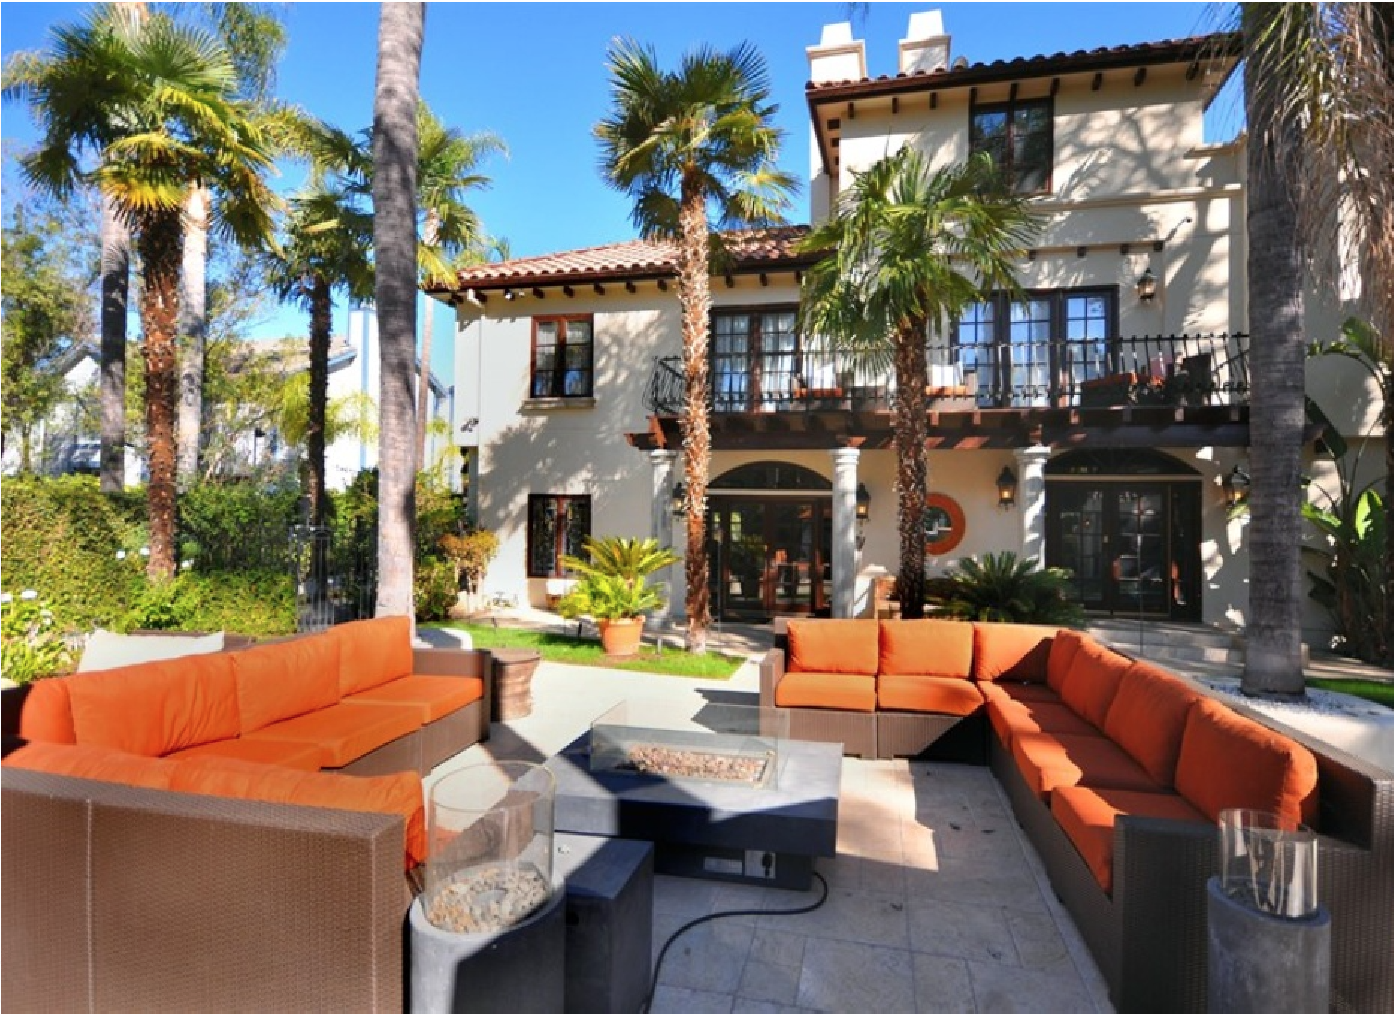 Marc Anthony's Spanish-style Encino, CA mansion hit the market last fall for $2.75 million.